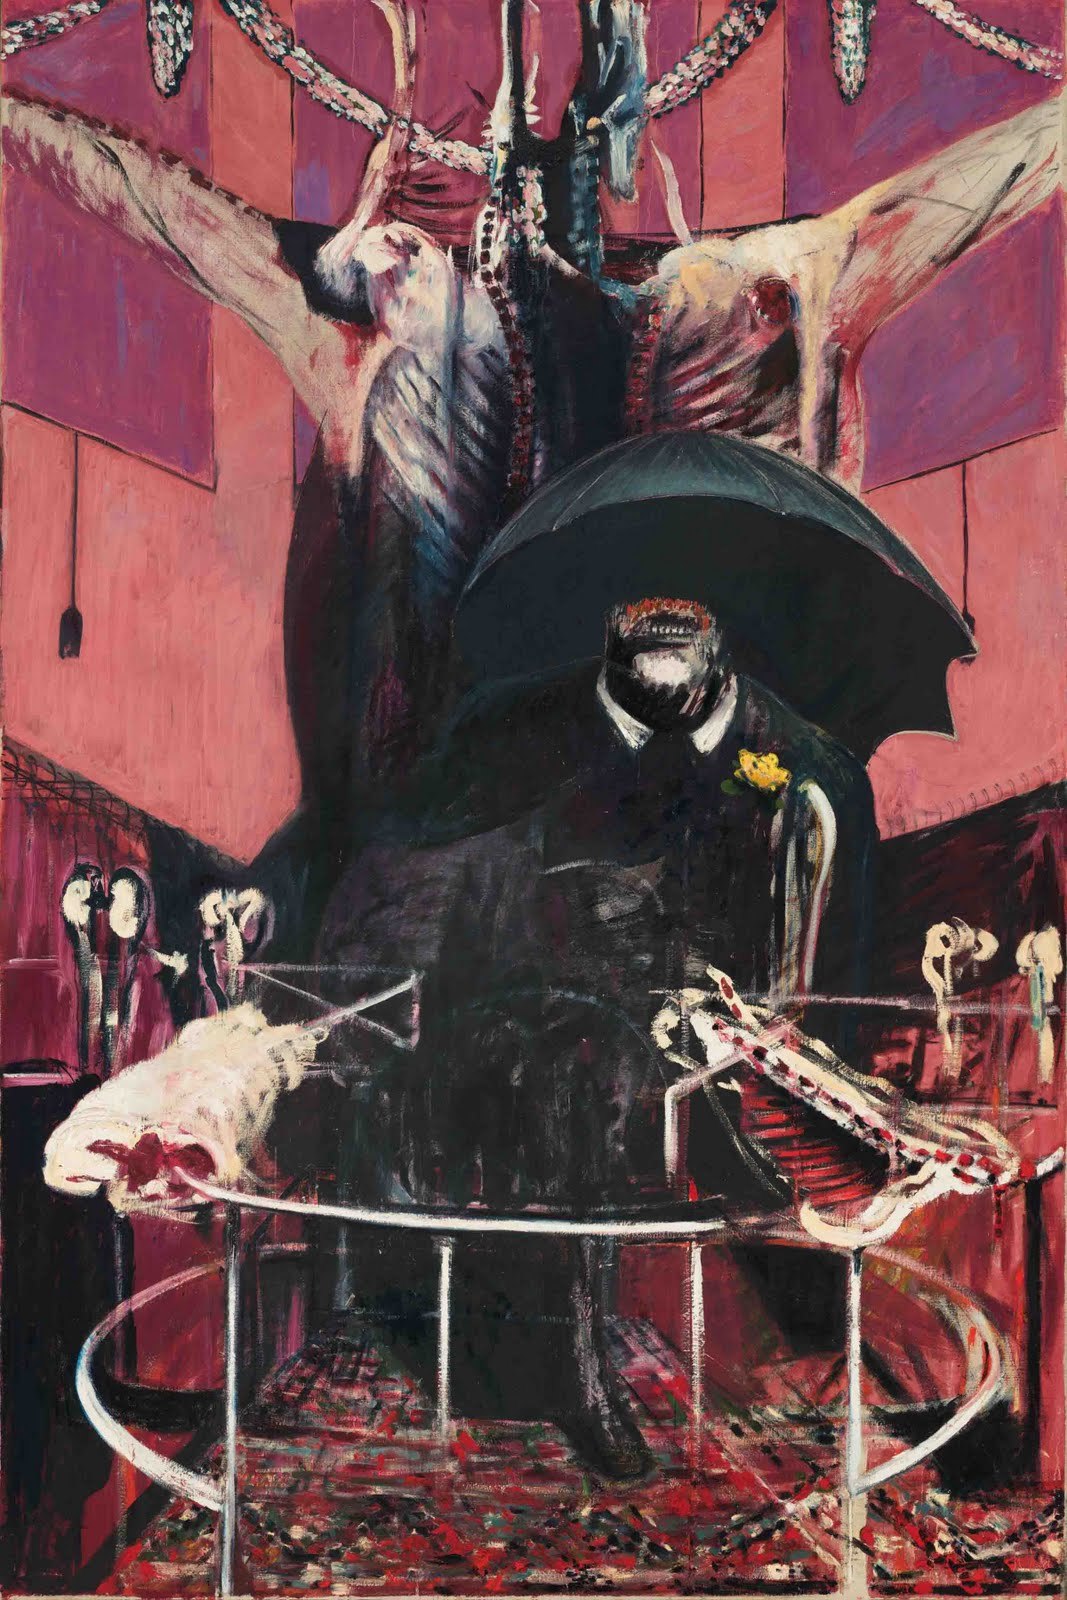 “Diagram of a Slaughterhouse" | Francis Bacon
"Oh, how wrong it is for flesh to be made from flesh; for a greedy body to fatten, by swallowing another body; for one creature to live by the death of another creature! So amongst such riches, that...